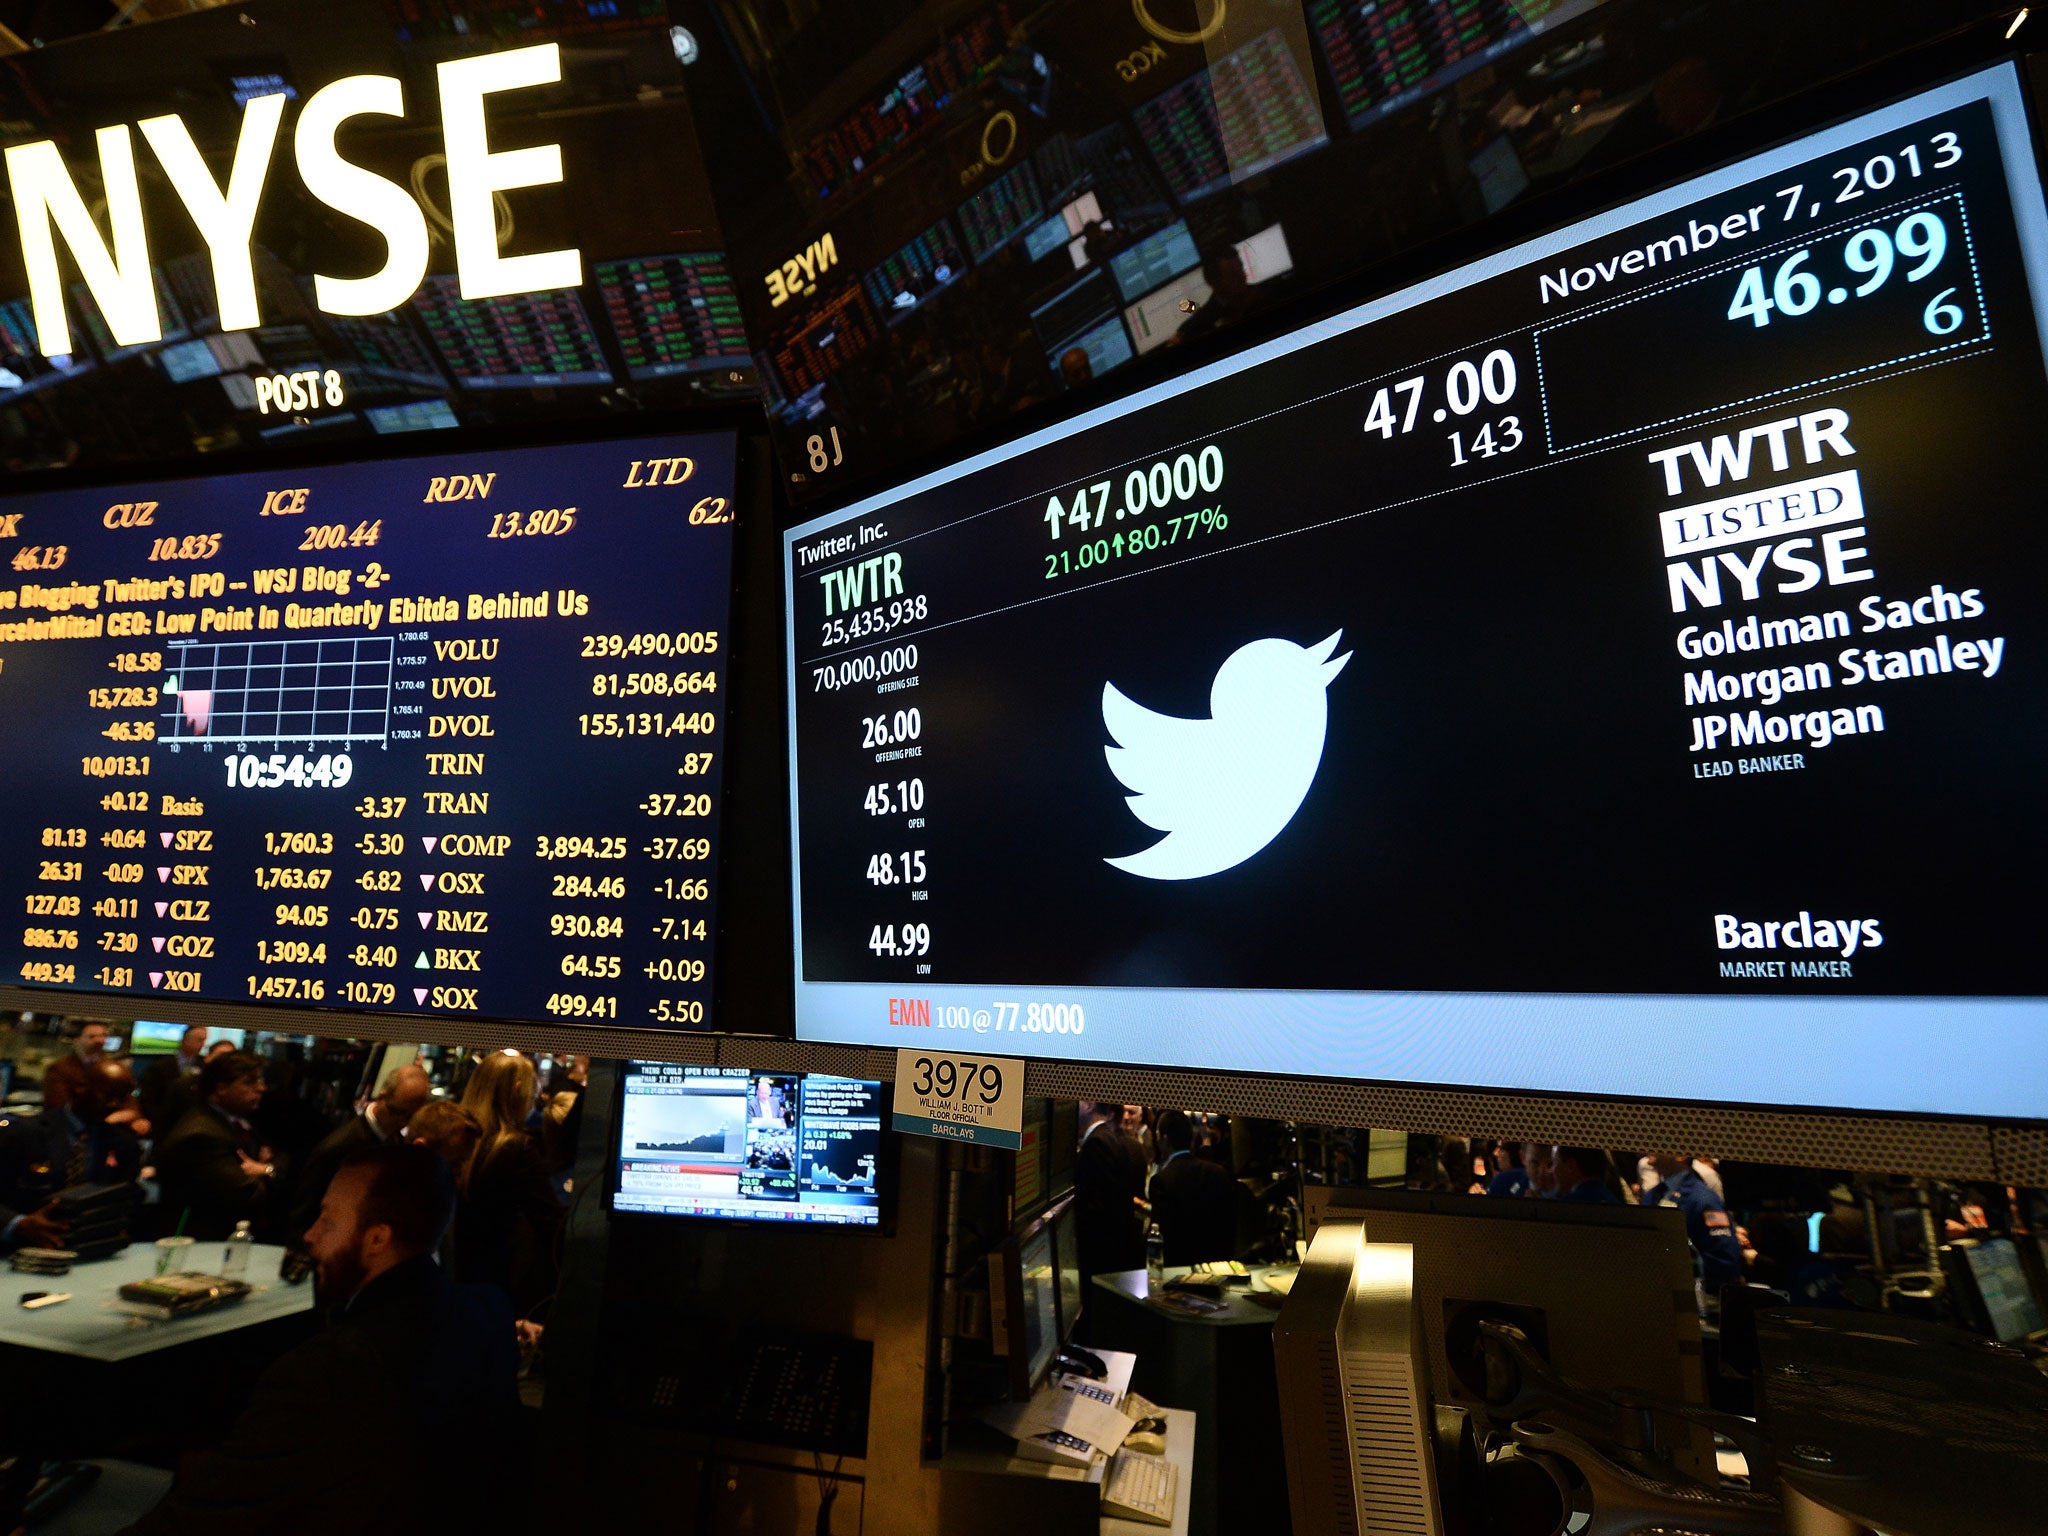 Morgan Stanley and JPMorgan saw little chance of Twitter’s stock rising in the short term as they rated it as the equivalent of a “hold”